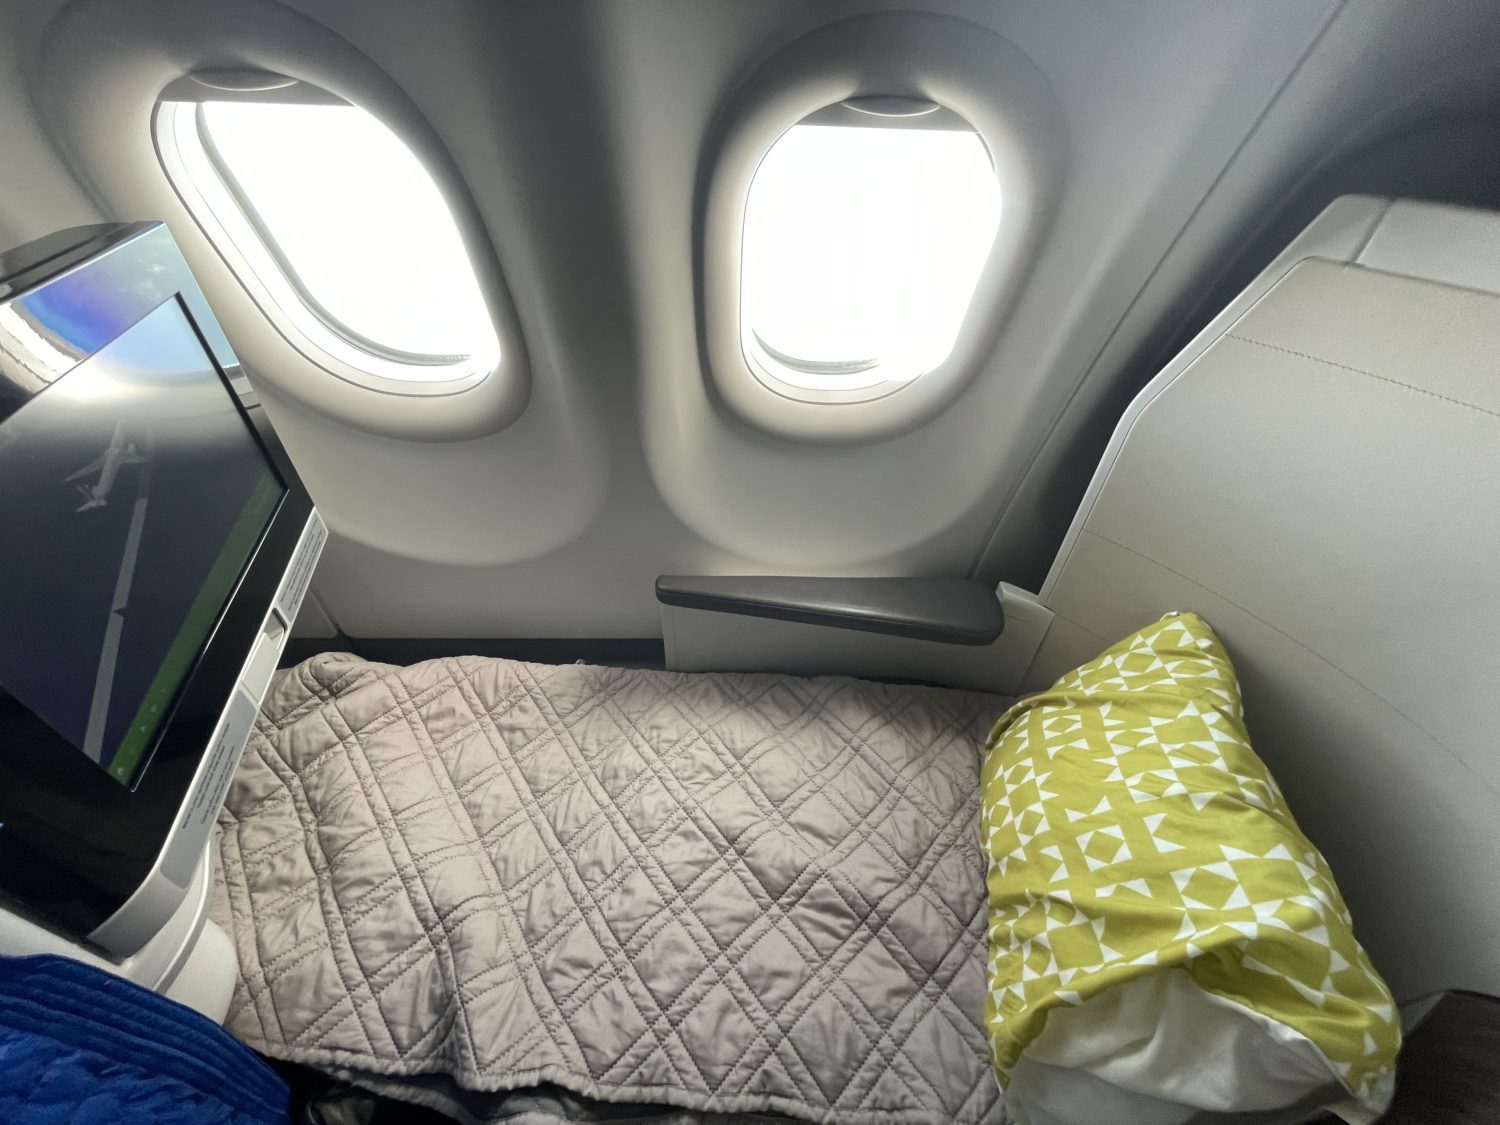 TAP Air Portugal business class bed mode